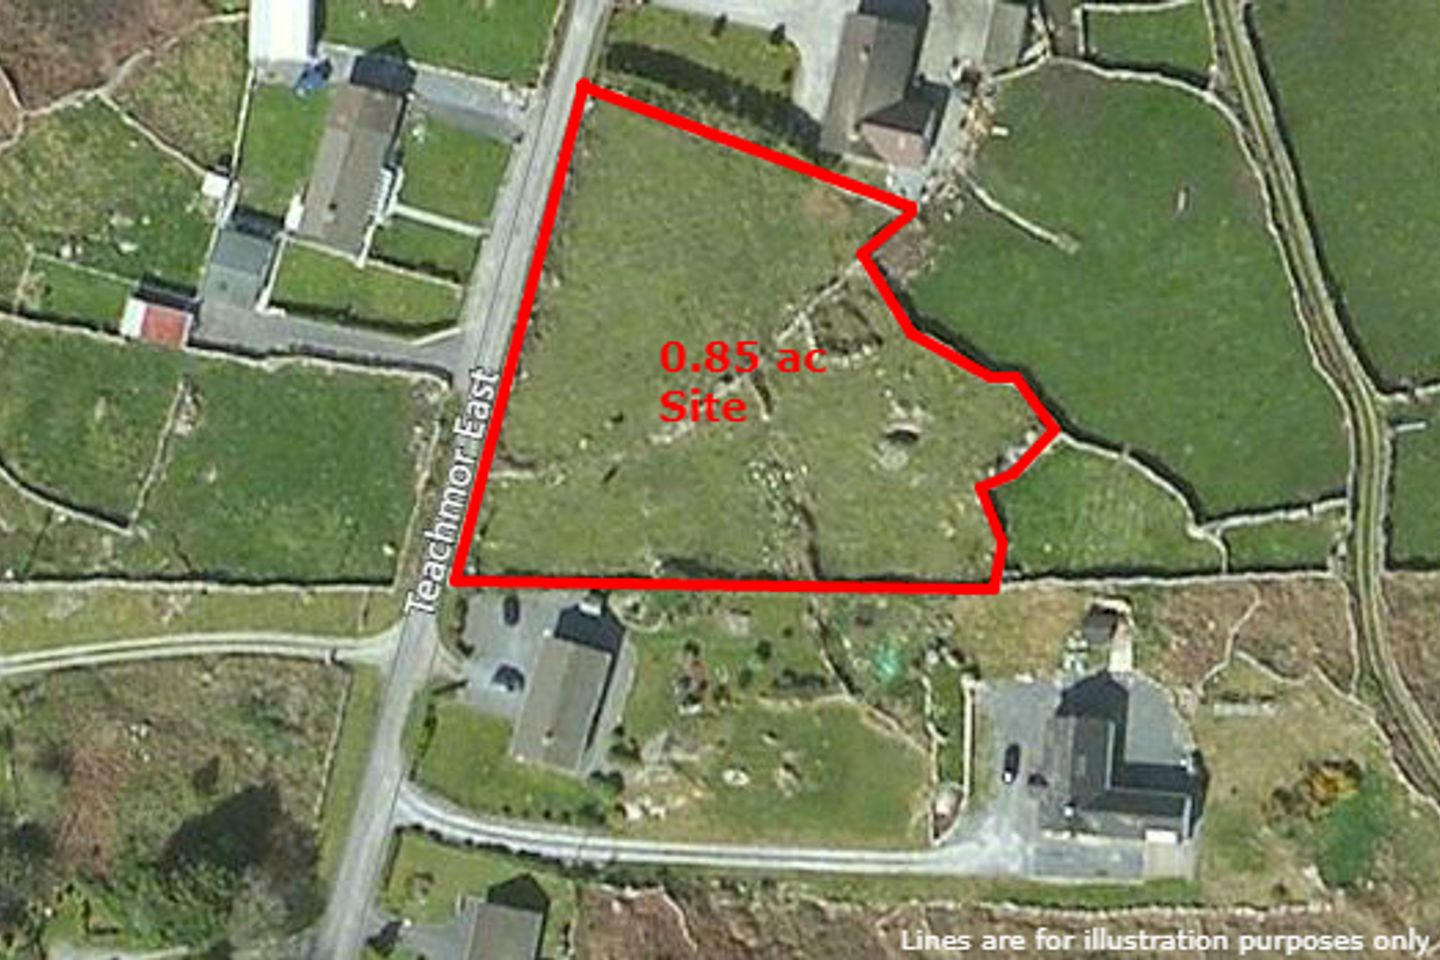 Site - Teachmor East, Inverin, Co. Galway